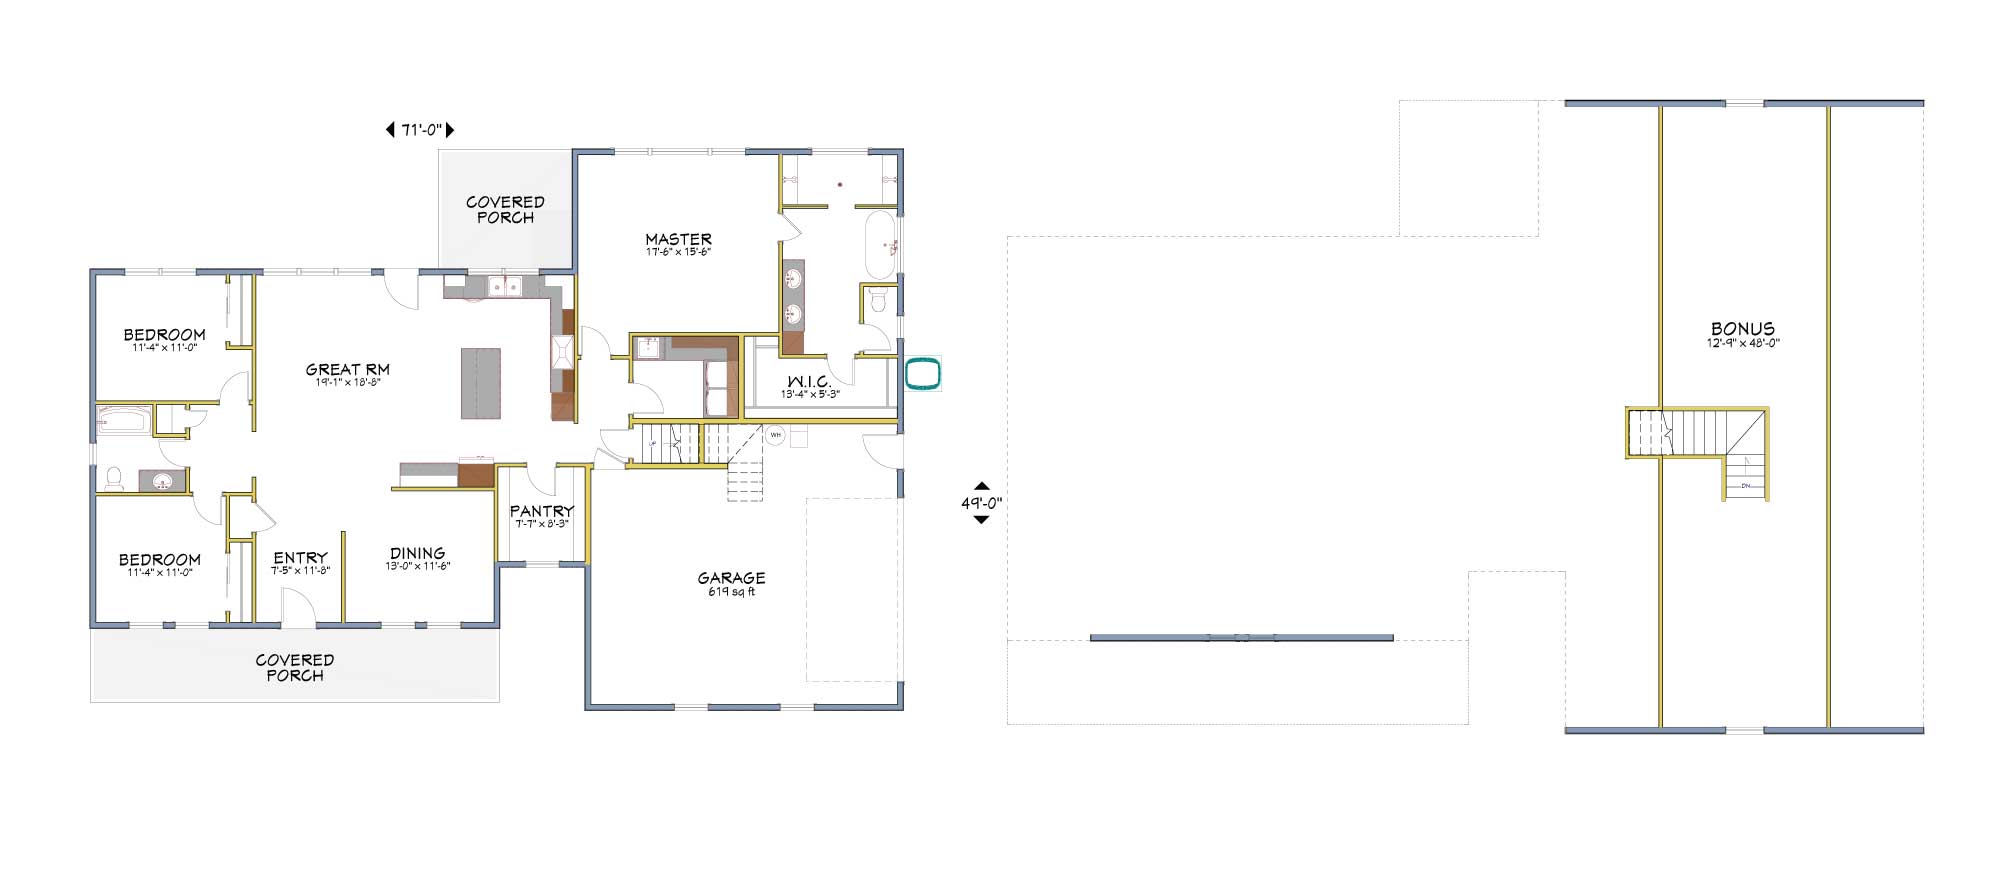 Floor plan of a custom Farmhouse style home from Design NW